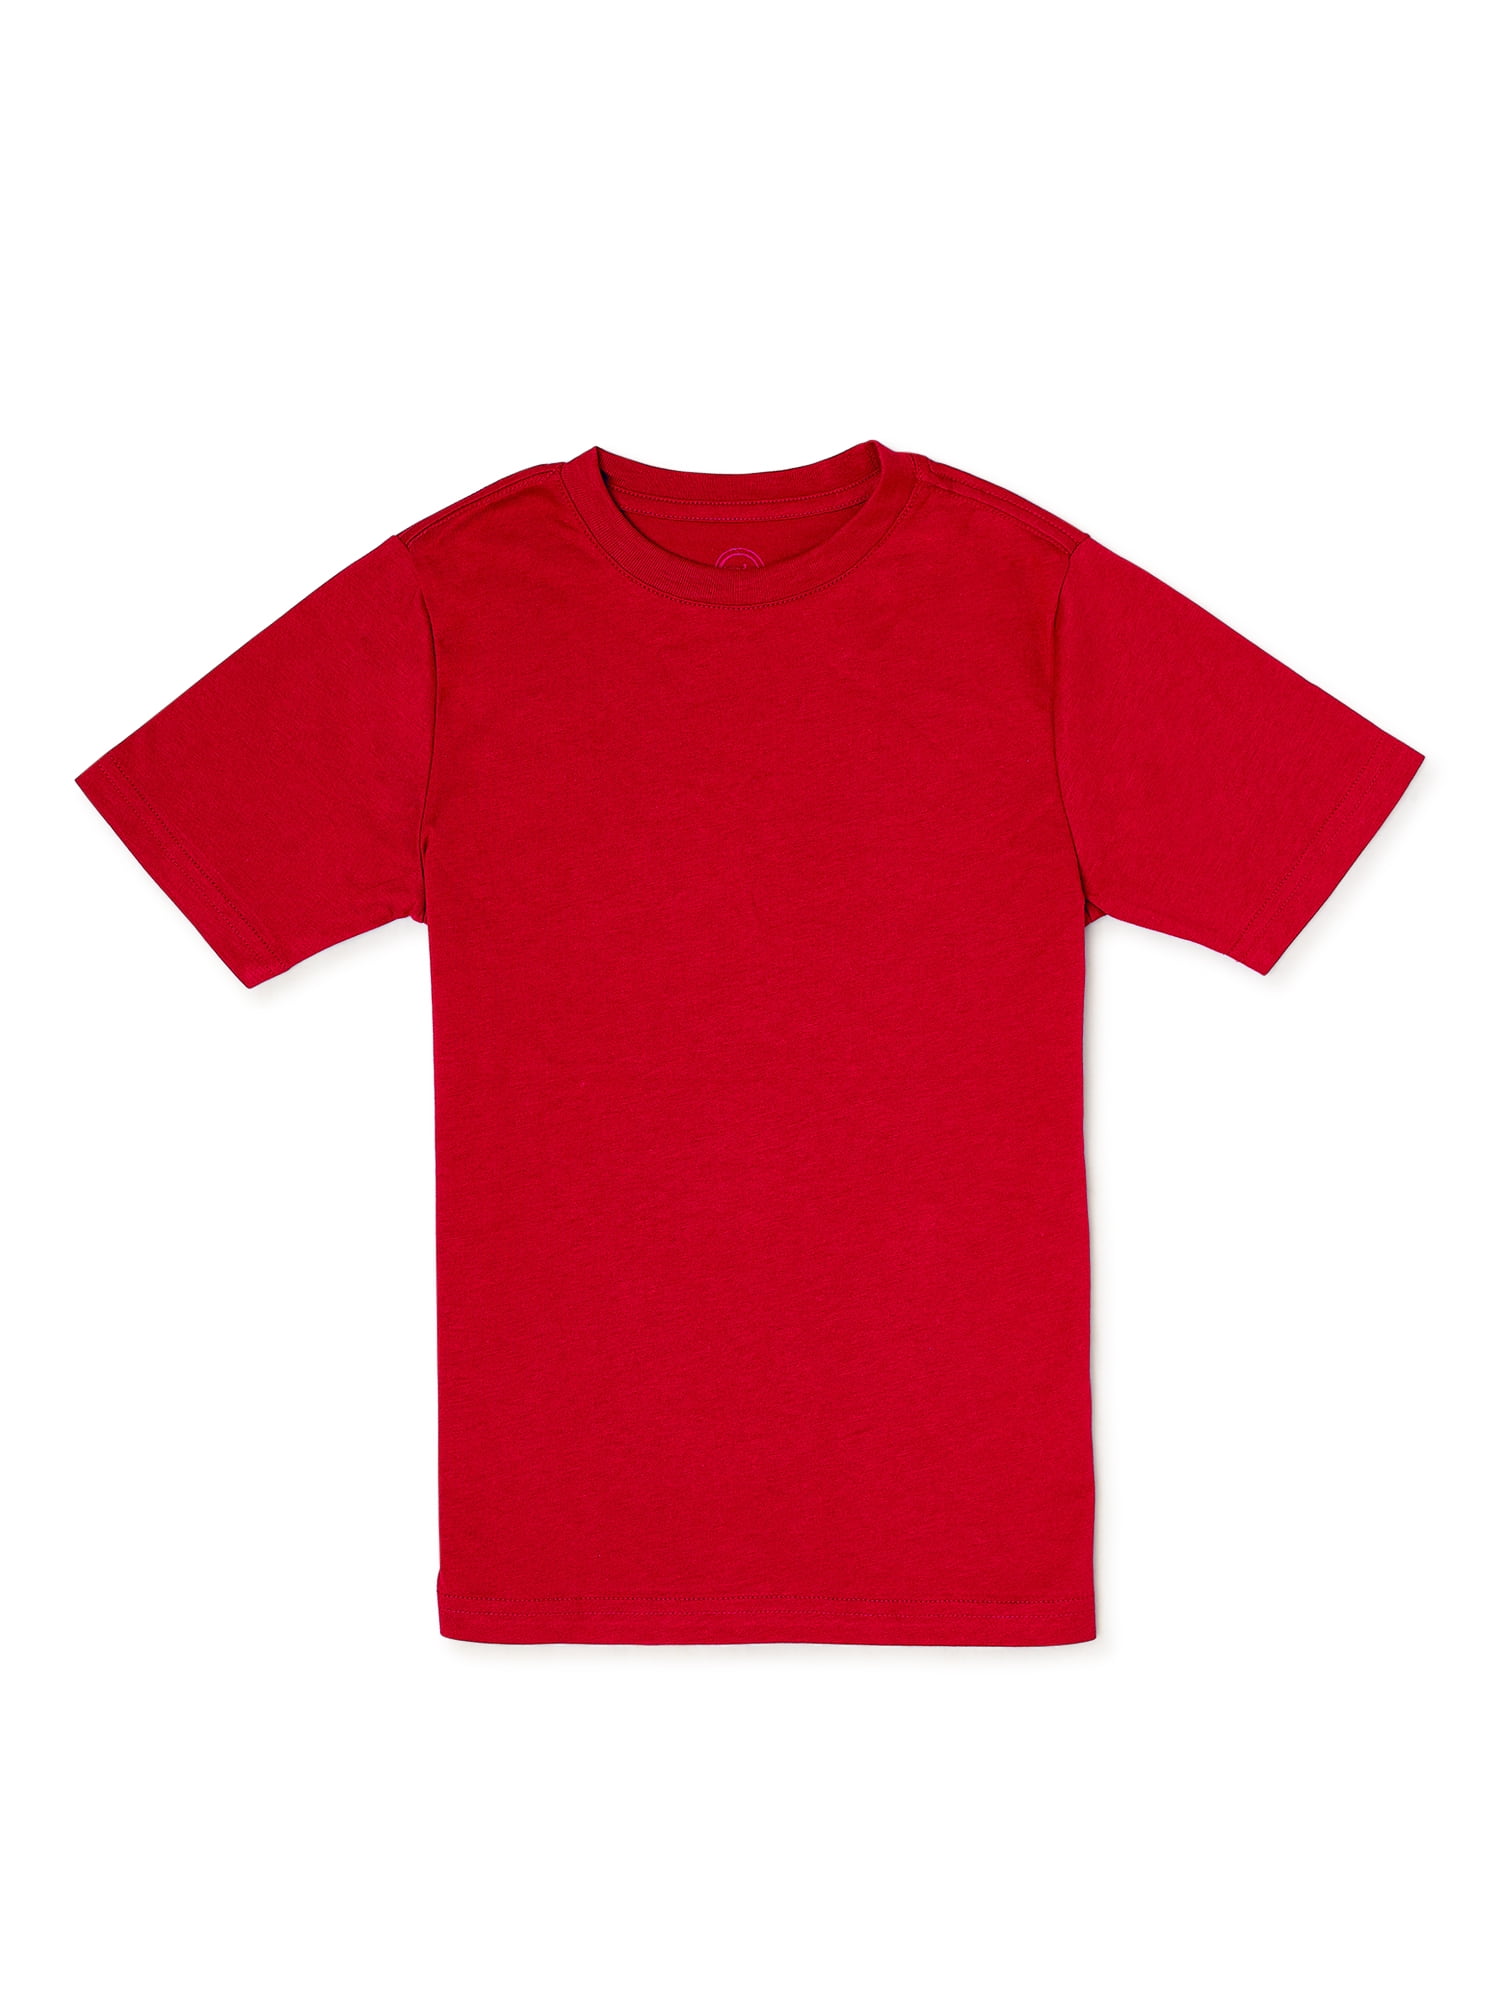 5 Pack Multi Pack T Shirts 100% Cotton Boys Girls Plain Round Neck Tshirt Ideal for PE and School Uniform